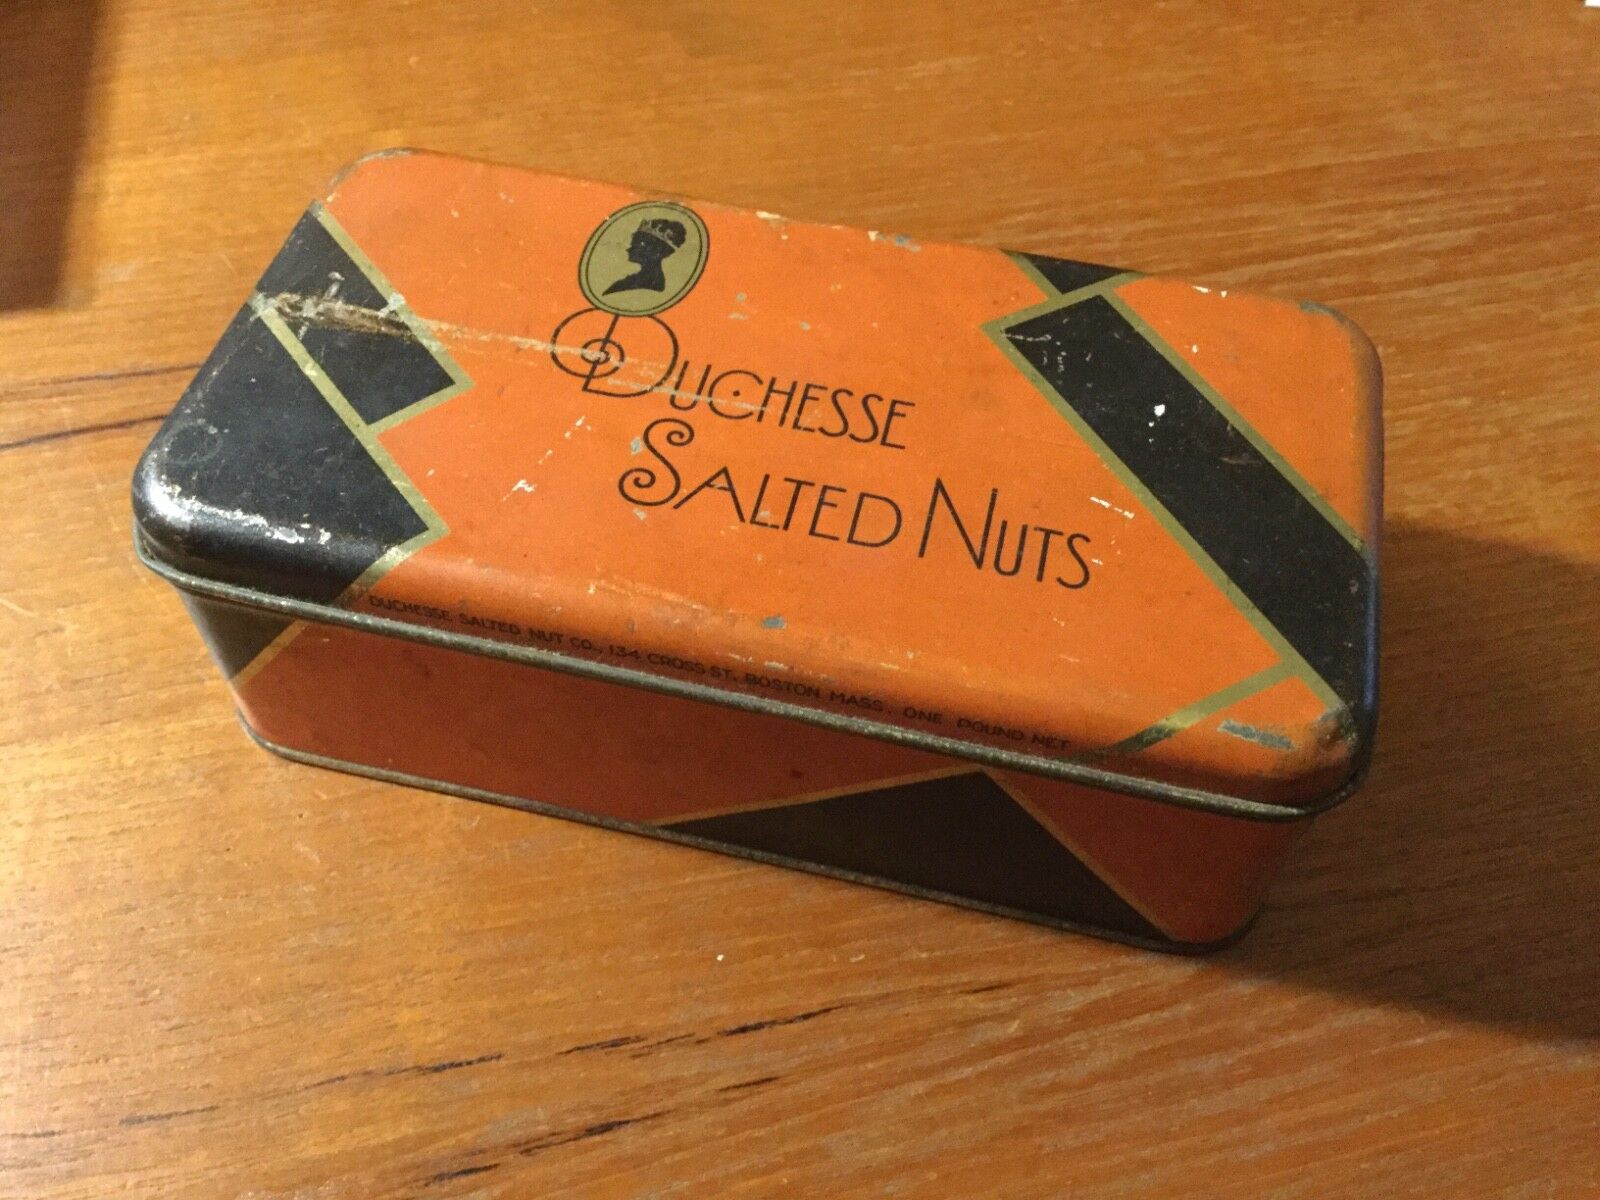 Vintage Duchesse Salted Nuts Boston MA 1930 Advertising Tin Container